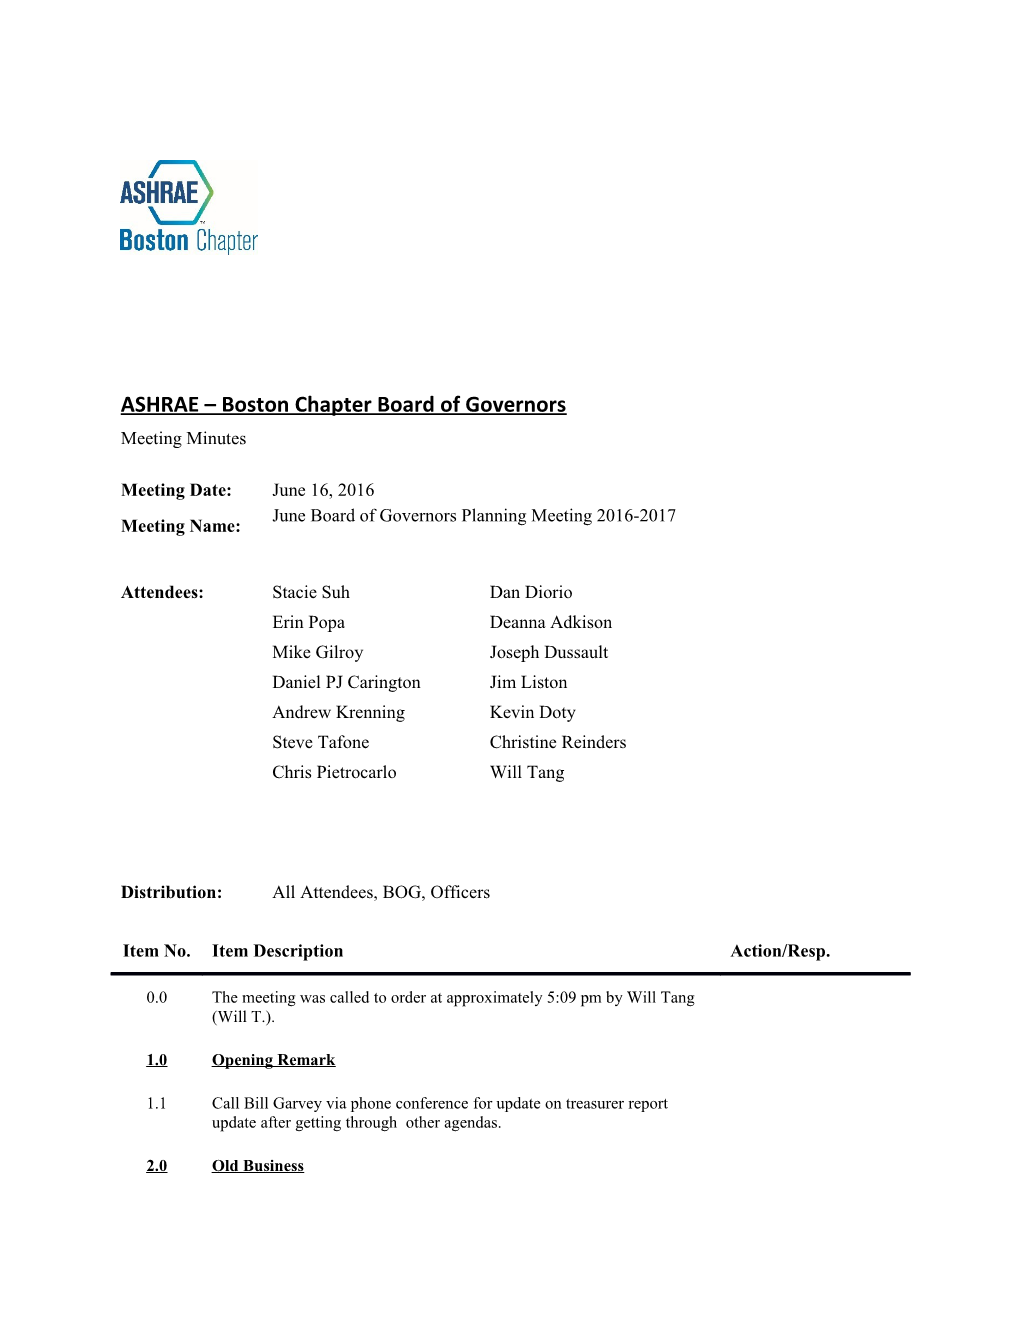 ASHRAE Boston Chapter Board of Governors